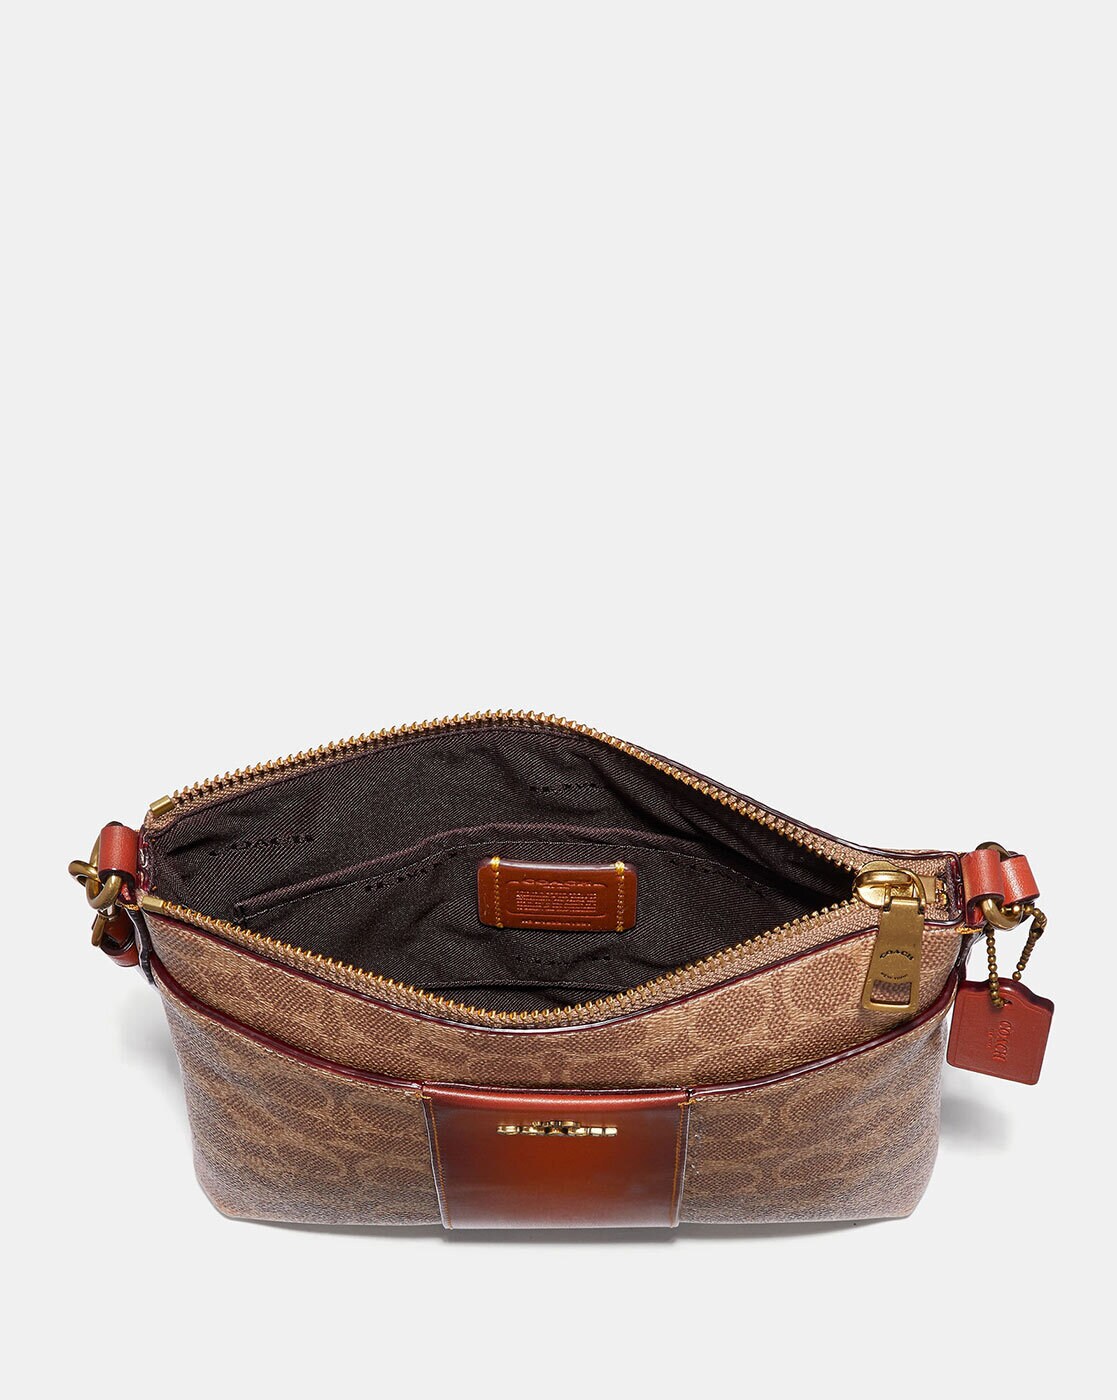 Slim Striped Crossbody Bag and Purse Strap in Dark Brown and Tan Brown with  Carabiner Slide Hook (1wide)